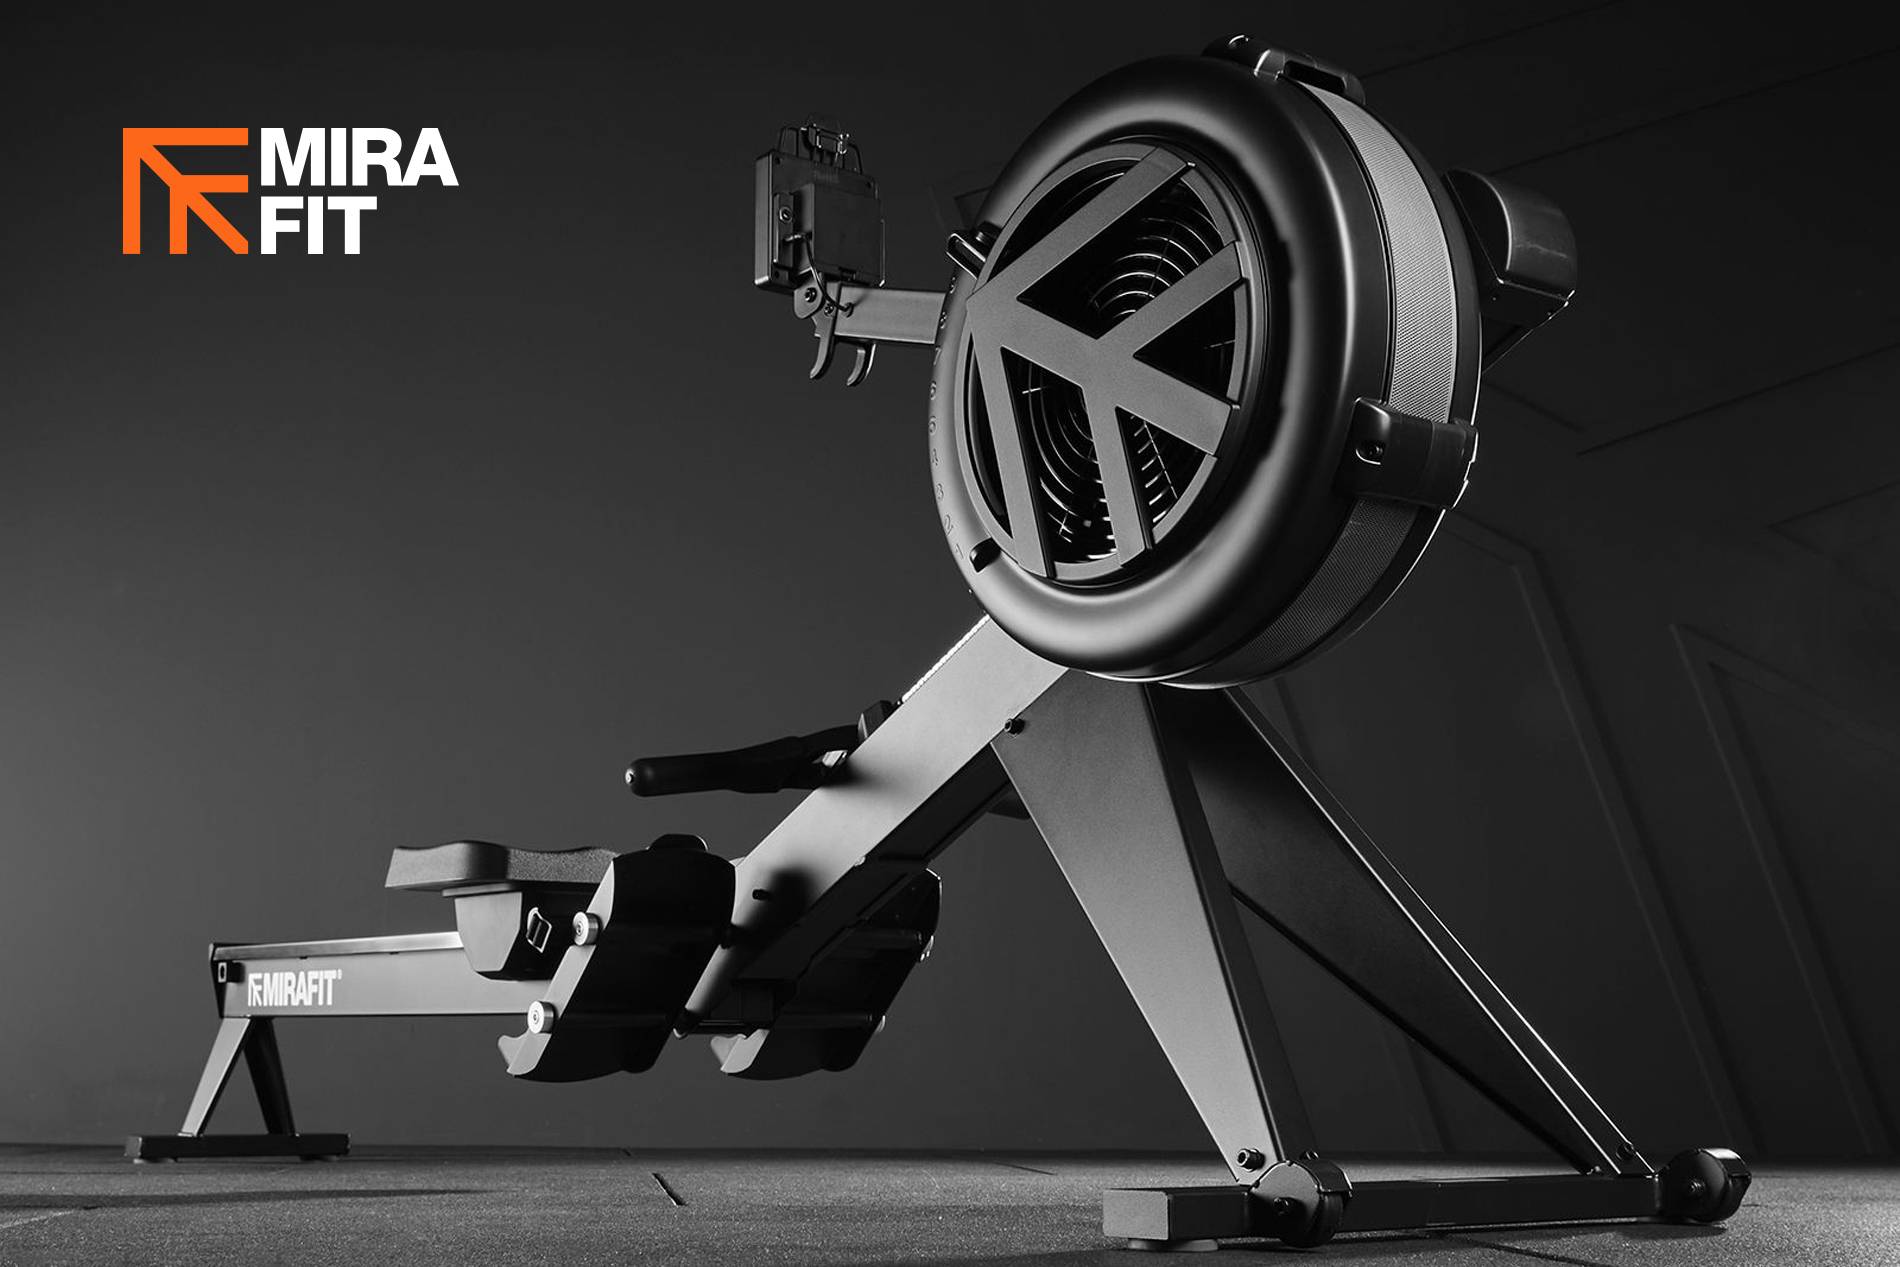 Win this Mirafit Rowing Machine - Only 620 Entries